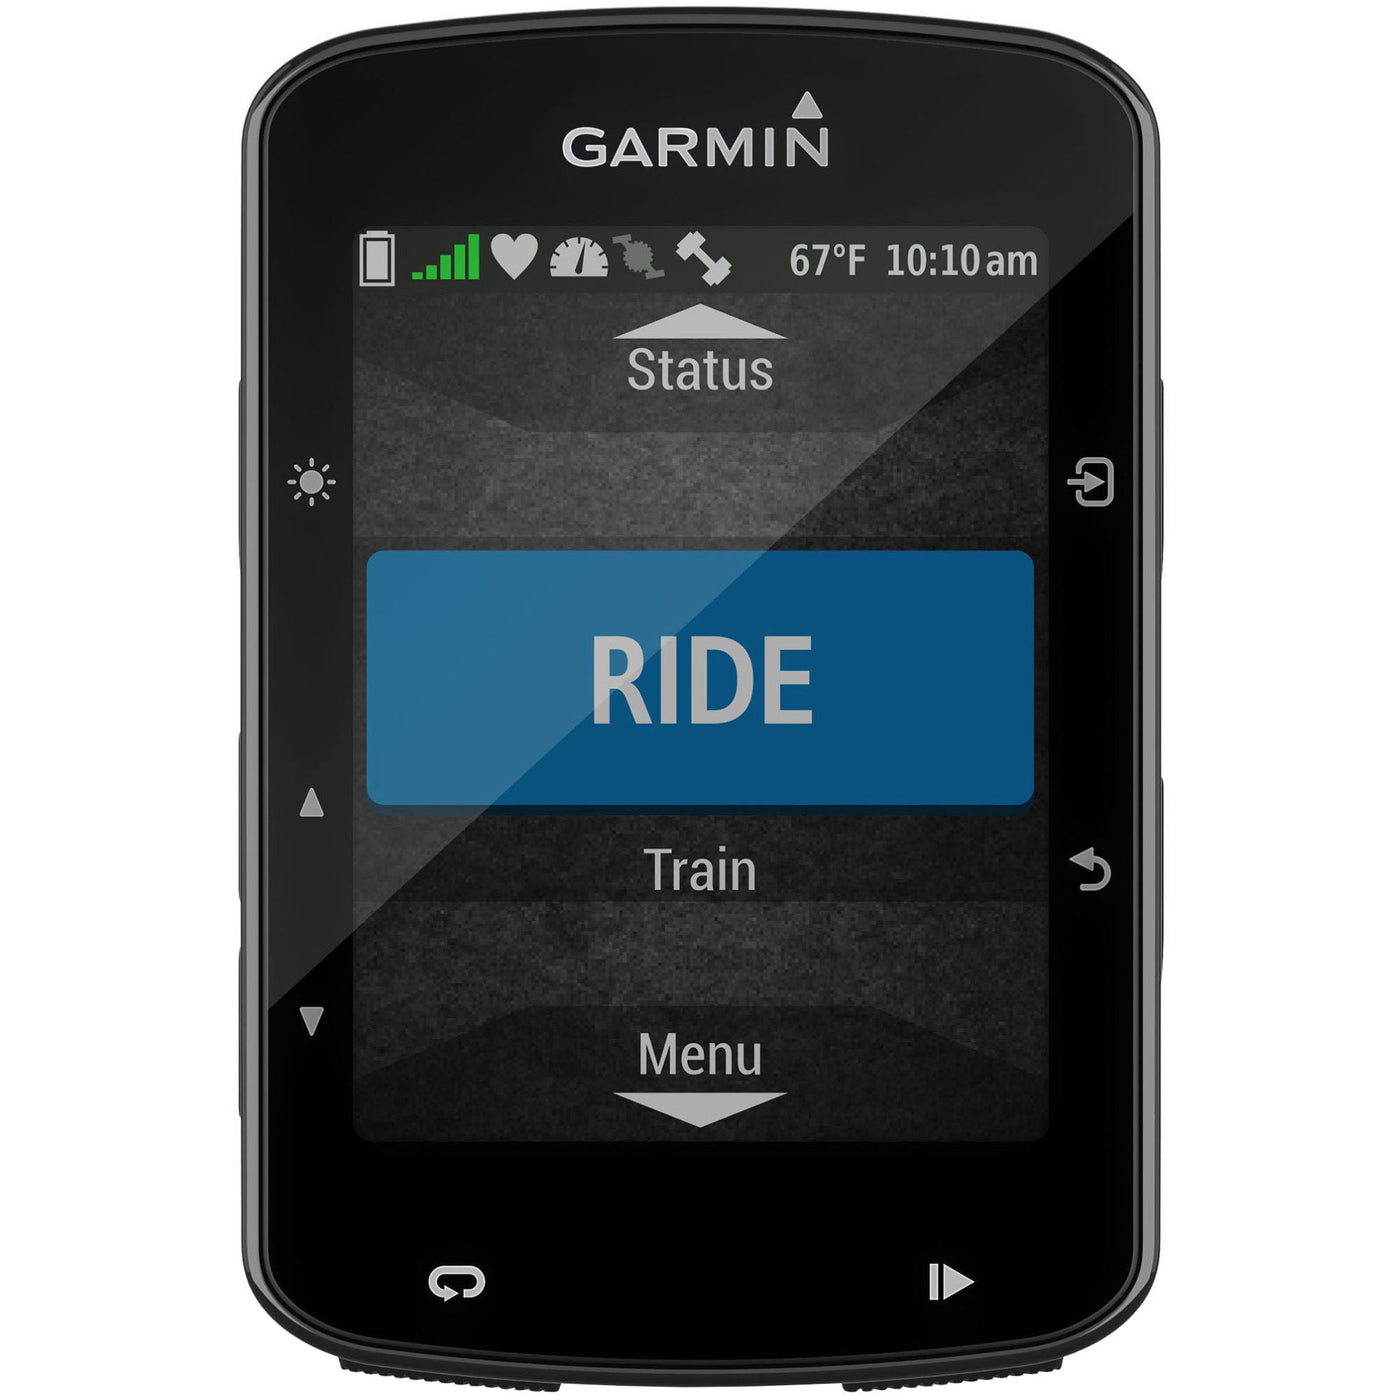 TACX FLUX S Smart Bike Trainer With Garmin Edge 520 Plus, HRM dual and Speed Cadence sensor 2 - Cyclop.in